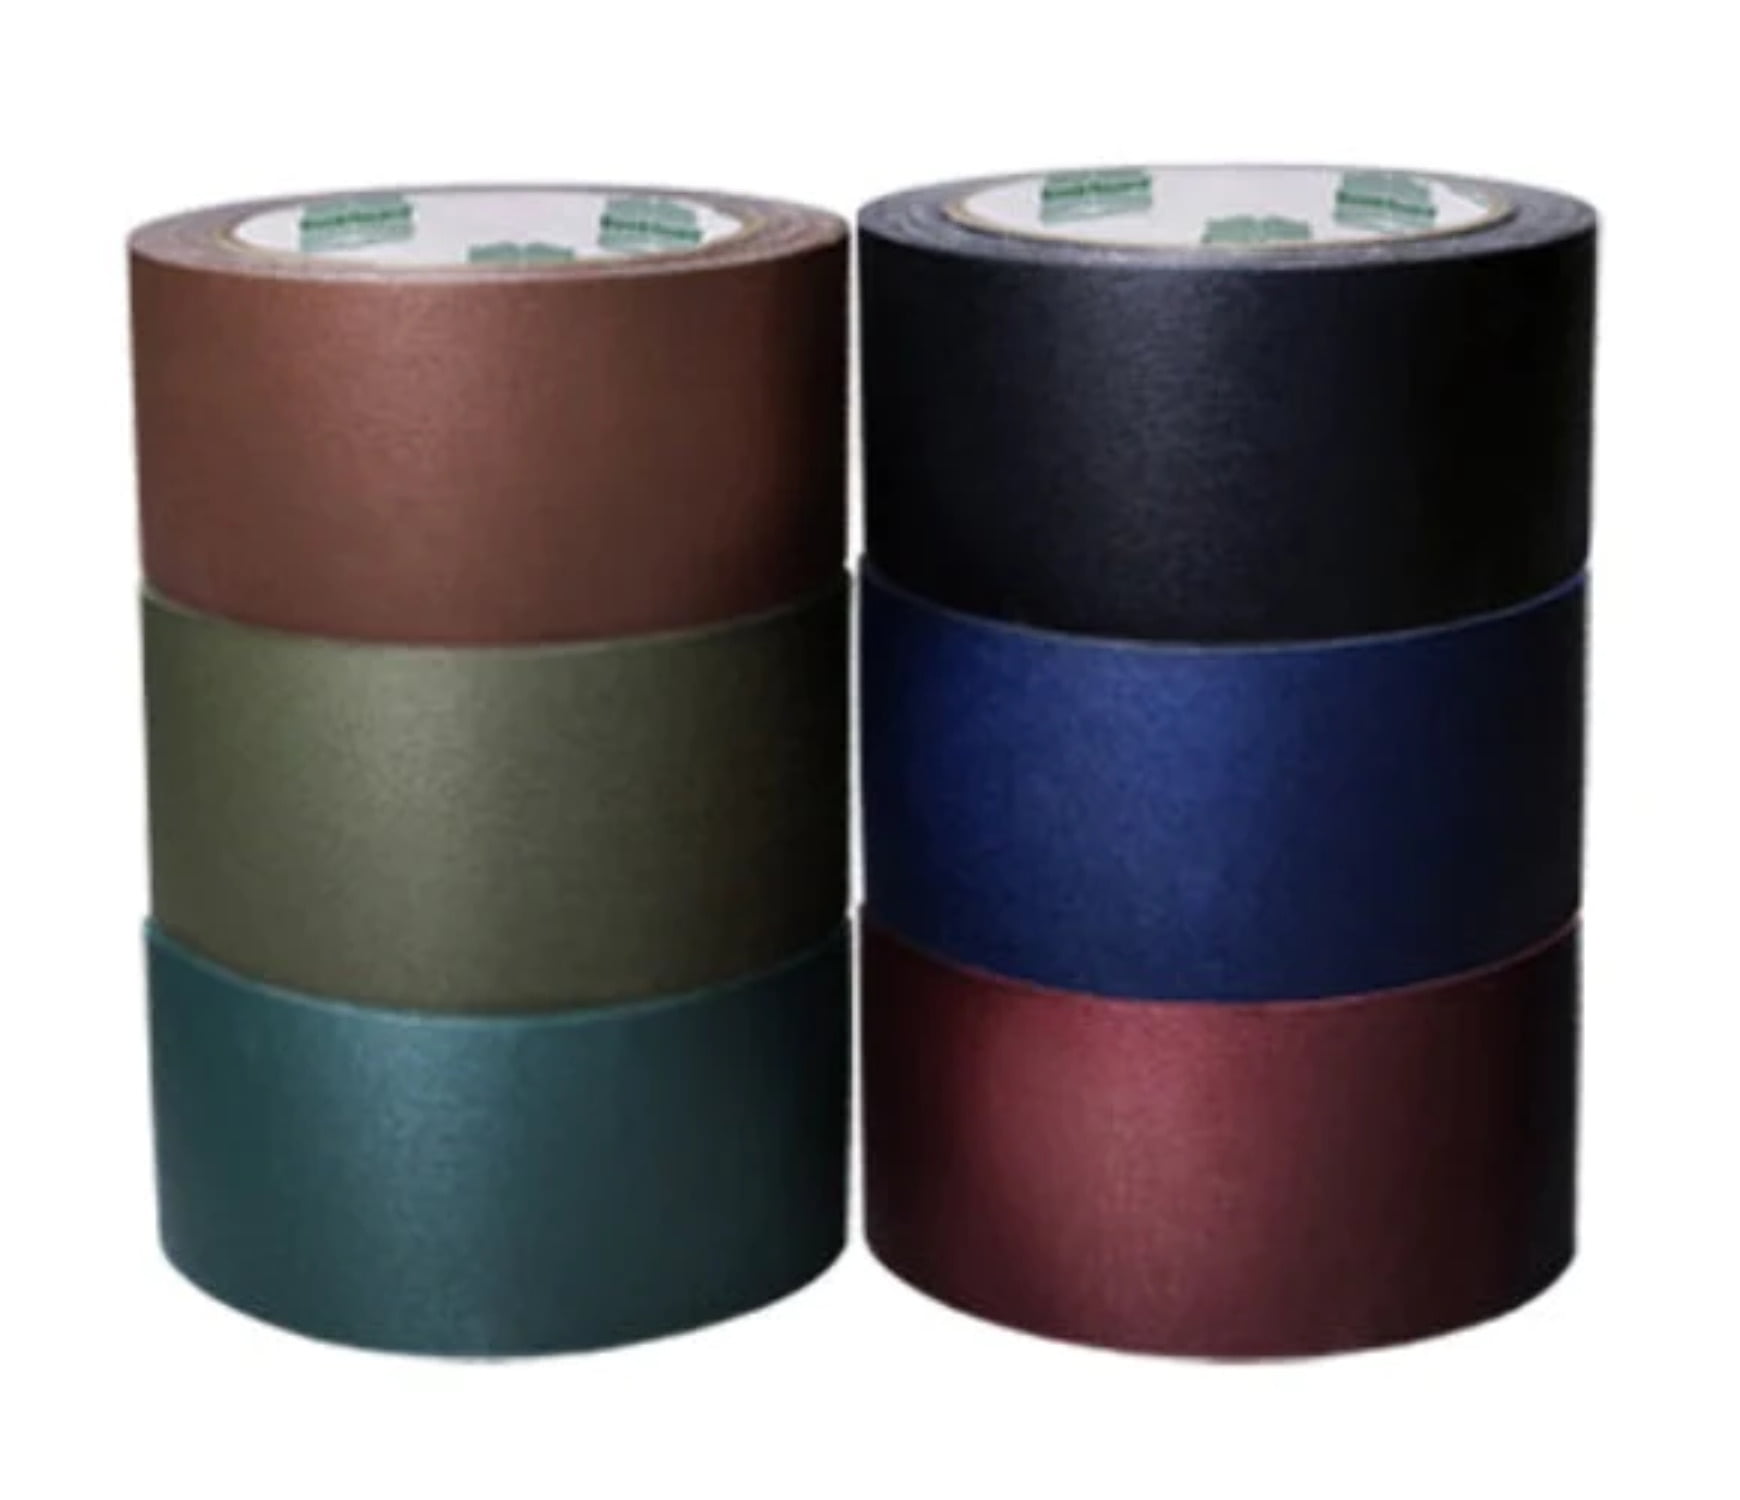 2 Pieces Cloth Bookbinding Repair Tape, 1 inch and 2 inch Bookbinding Tape 15 Ya CSS32085